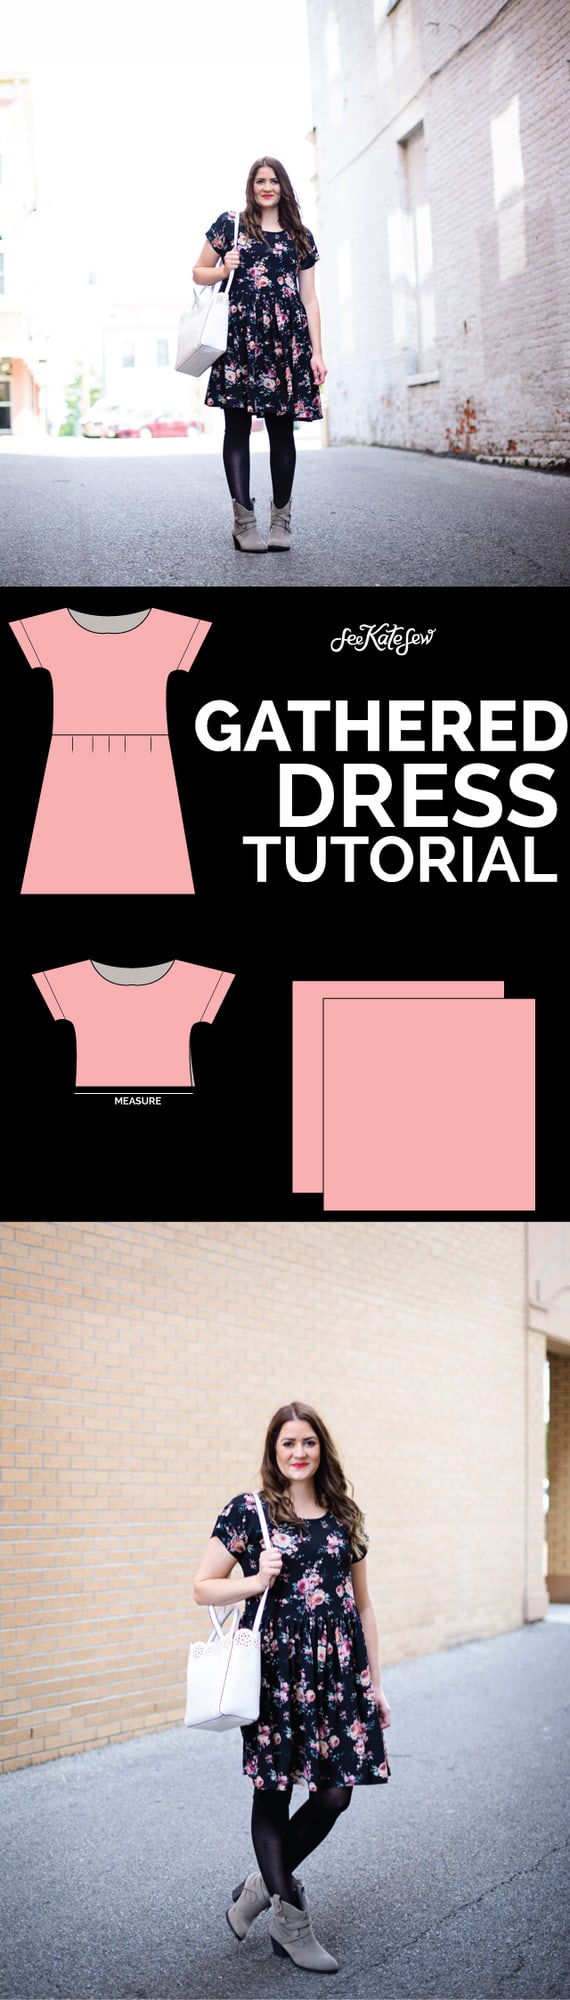 Gathered Dress Tutorial from the Zippy Pattern! | sewing patterns | clothing patterns and ideas | how to sew a gathered dress | how to sew a dress | sewing tips and tricks | DIY clothing | homemade clothing patterns || See Kate Sew #diyclothing #diygathereddress #diydress #sewingpatterns #seekatesew